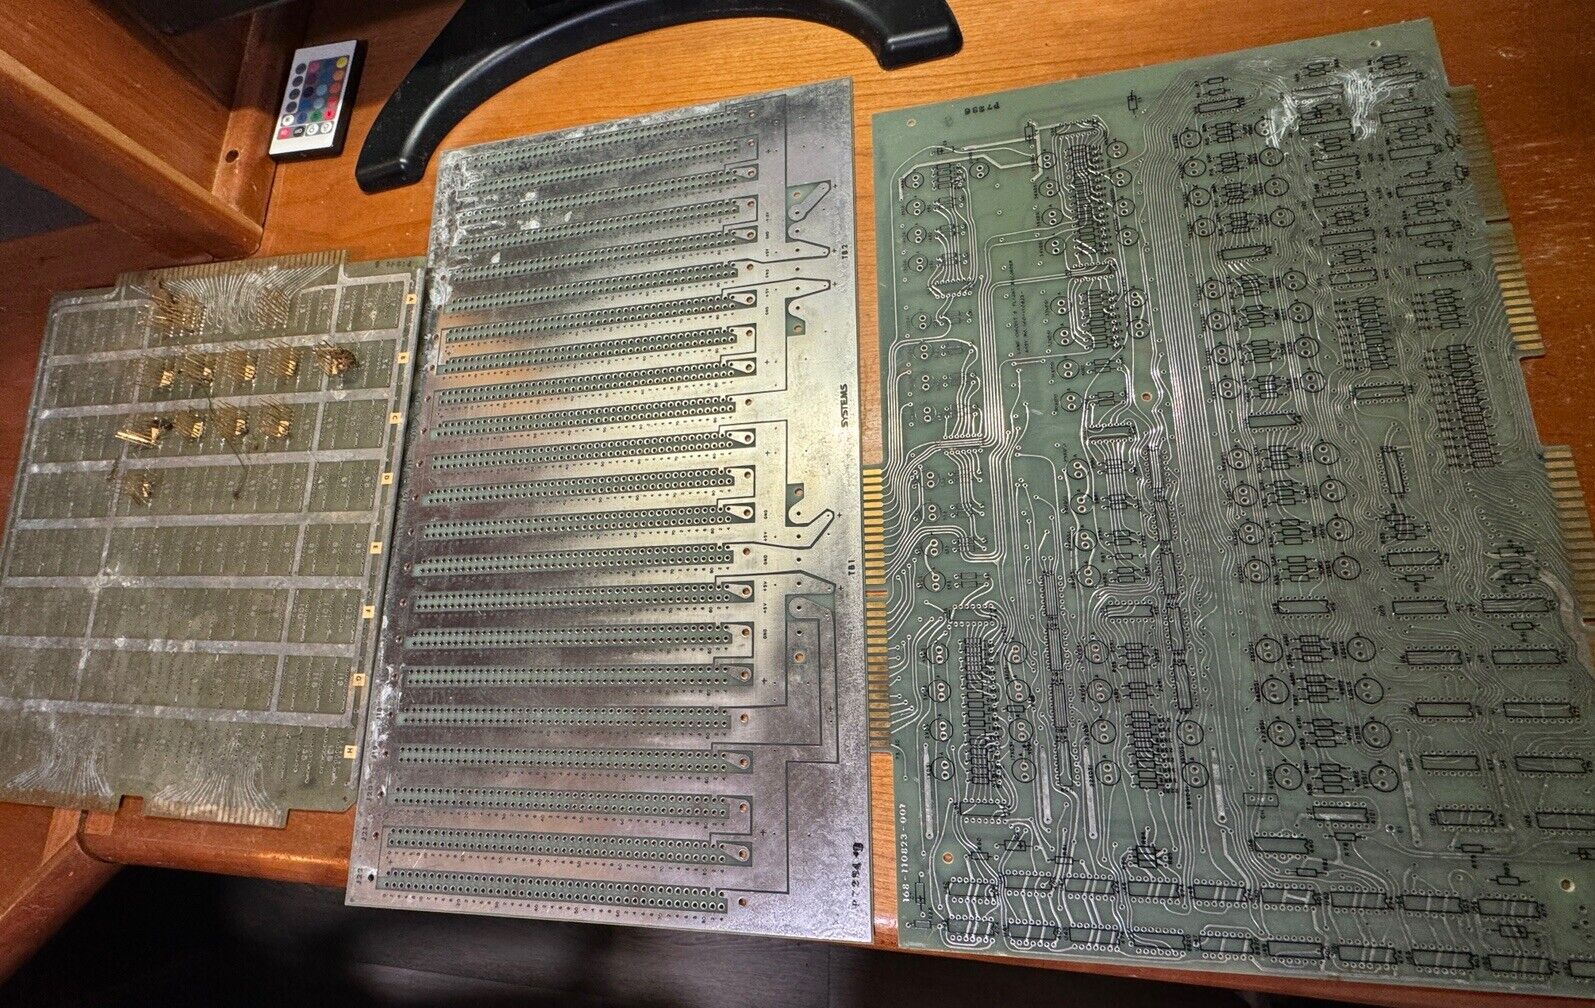 Lot of 33 Vintage 1970s multidata systems PCB boards used circuit boards retro